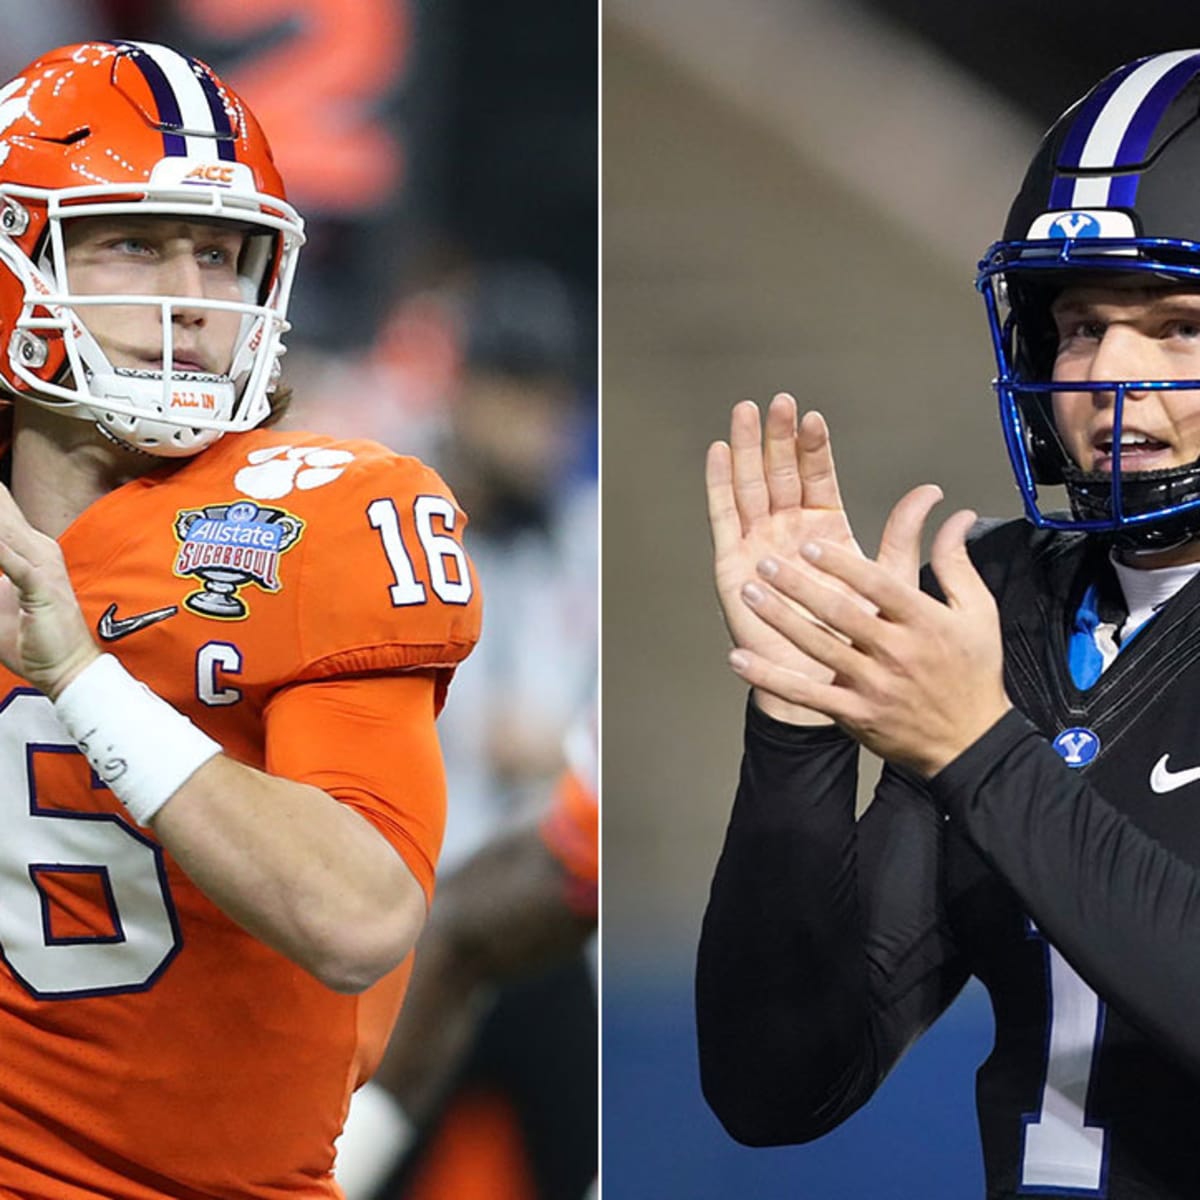 2021 NFL Draft: The rise of the QBs good news for New York Giants